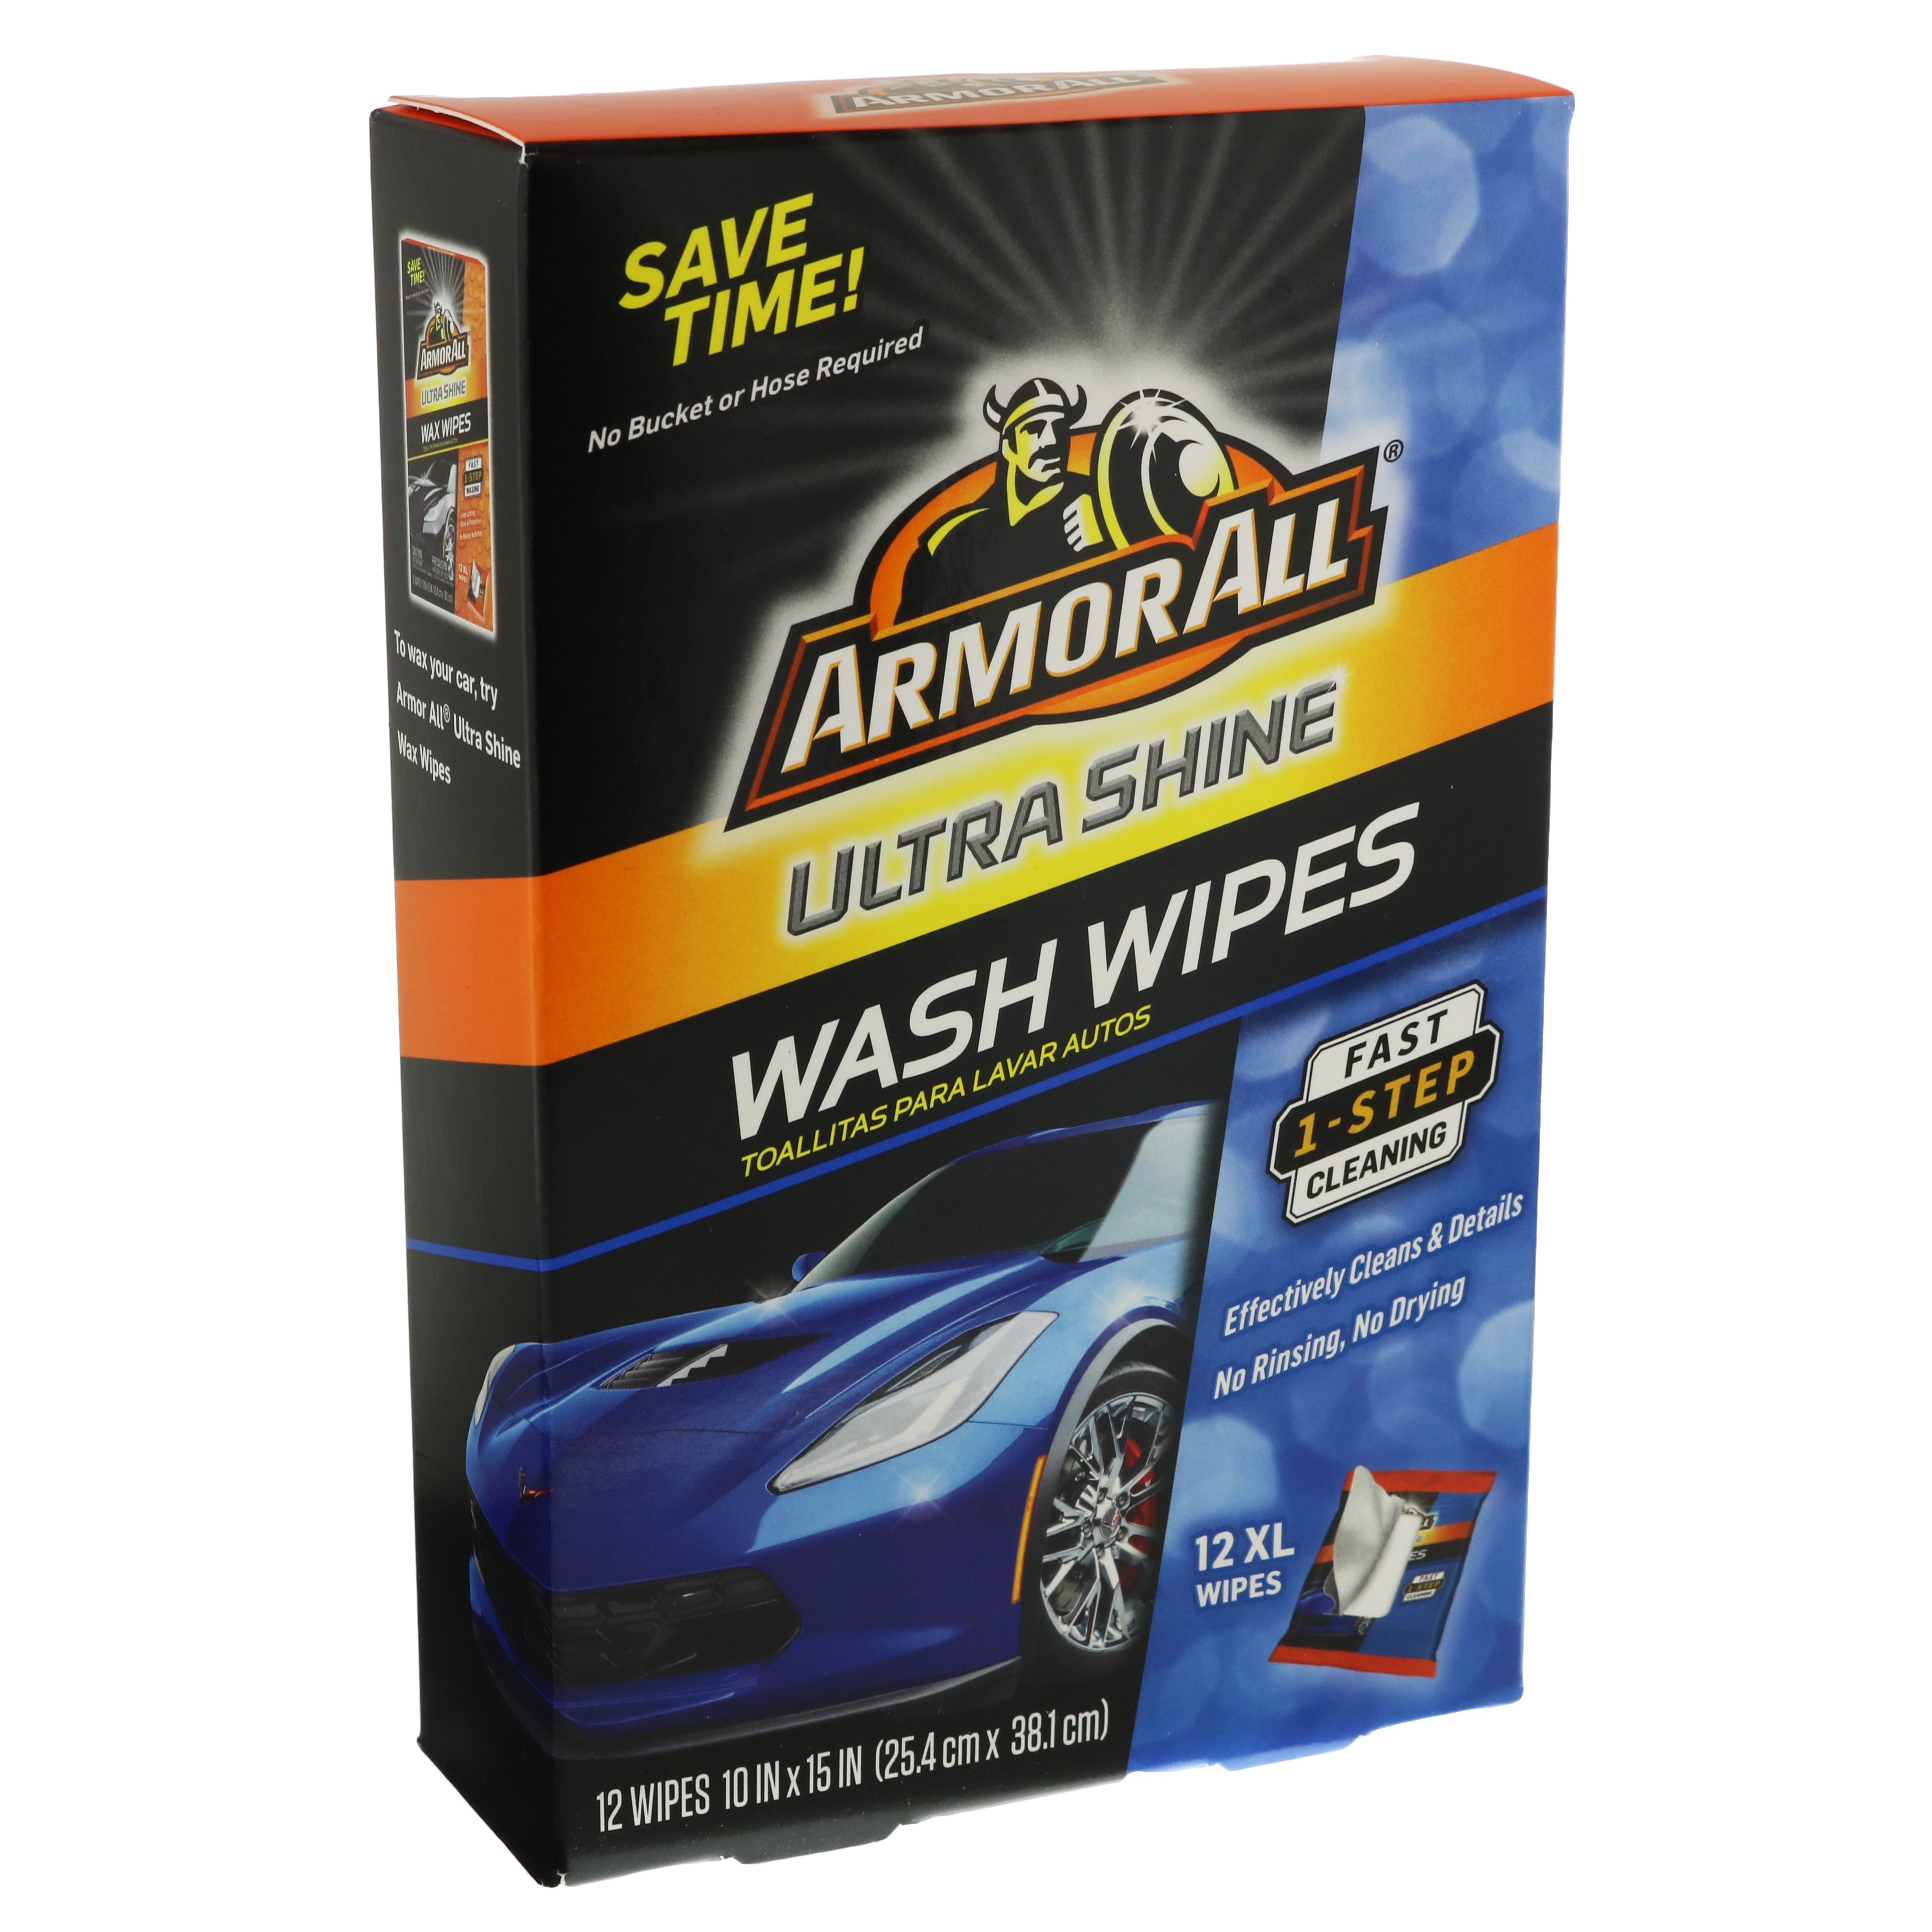 Armor All Glass Auto Wipes - Shop Automotive Cleaners at H-E-B